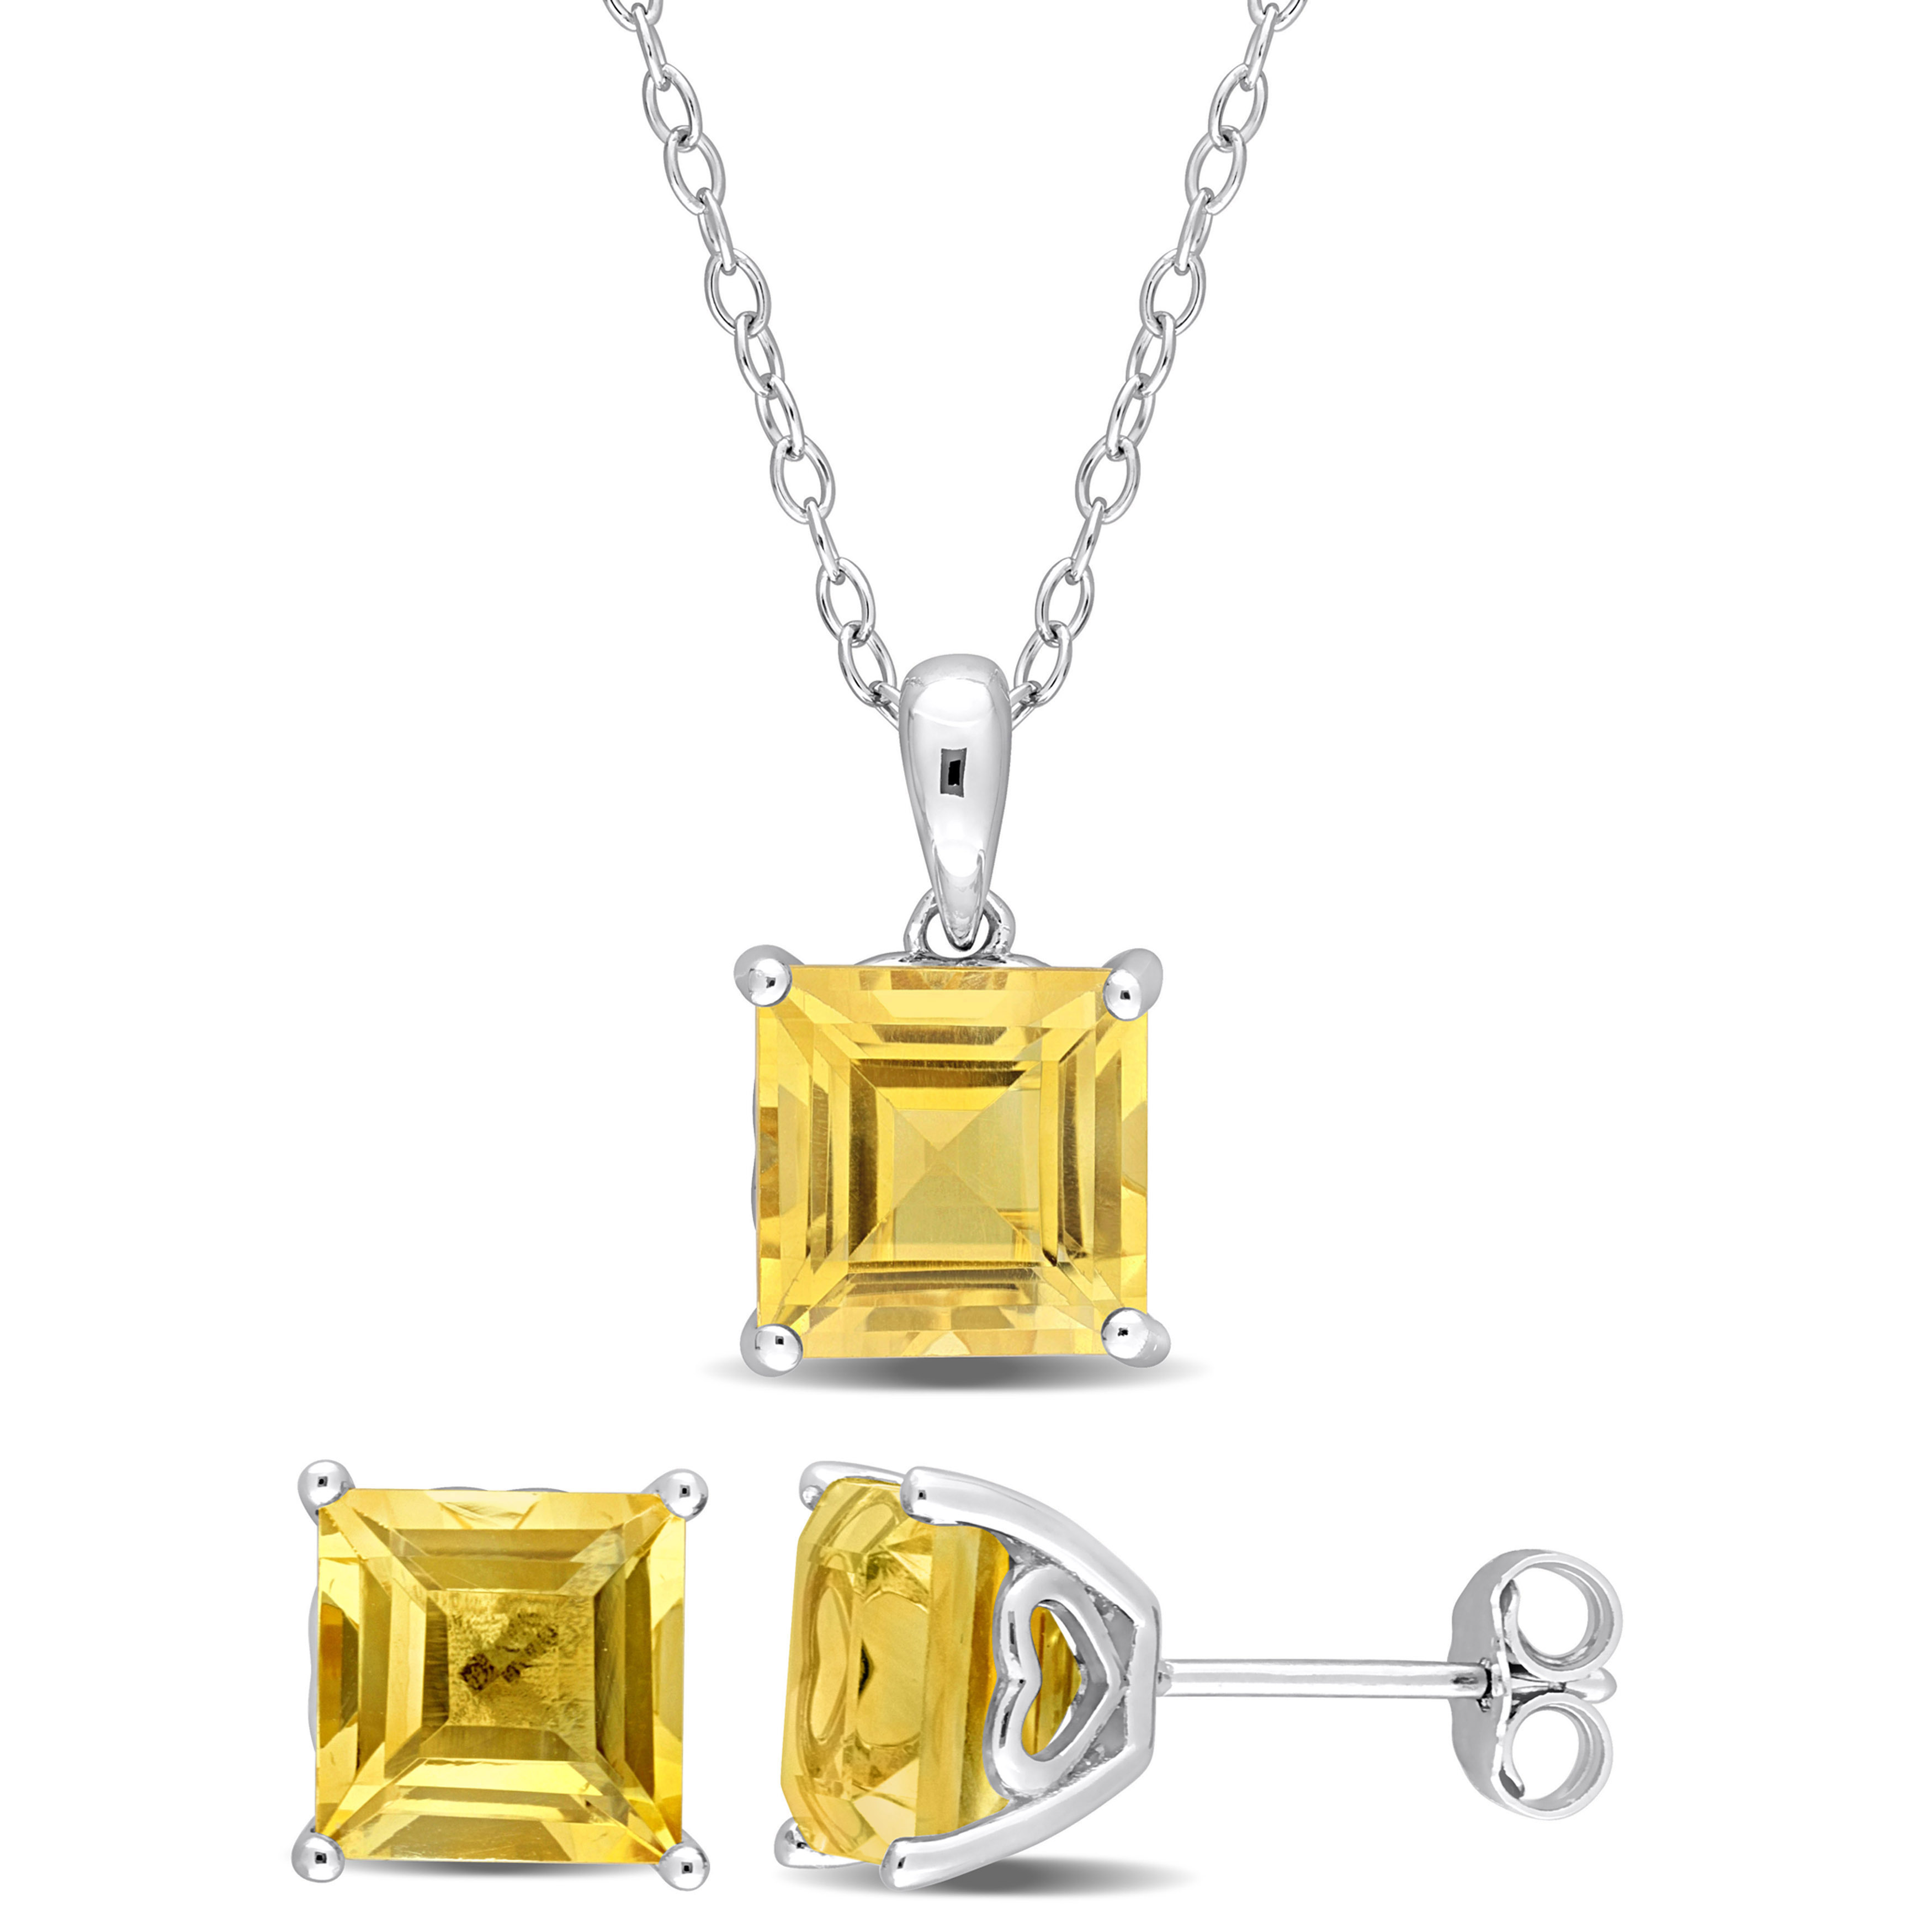 7 1/3 CT TGW Square Citrine 2-Piece Set of Pendant with Chain and Earrings in Sterling Silver